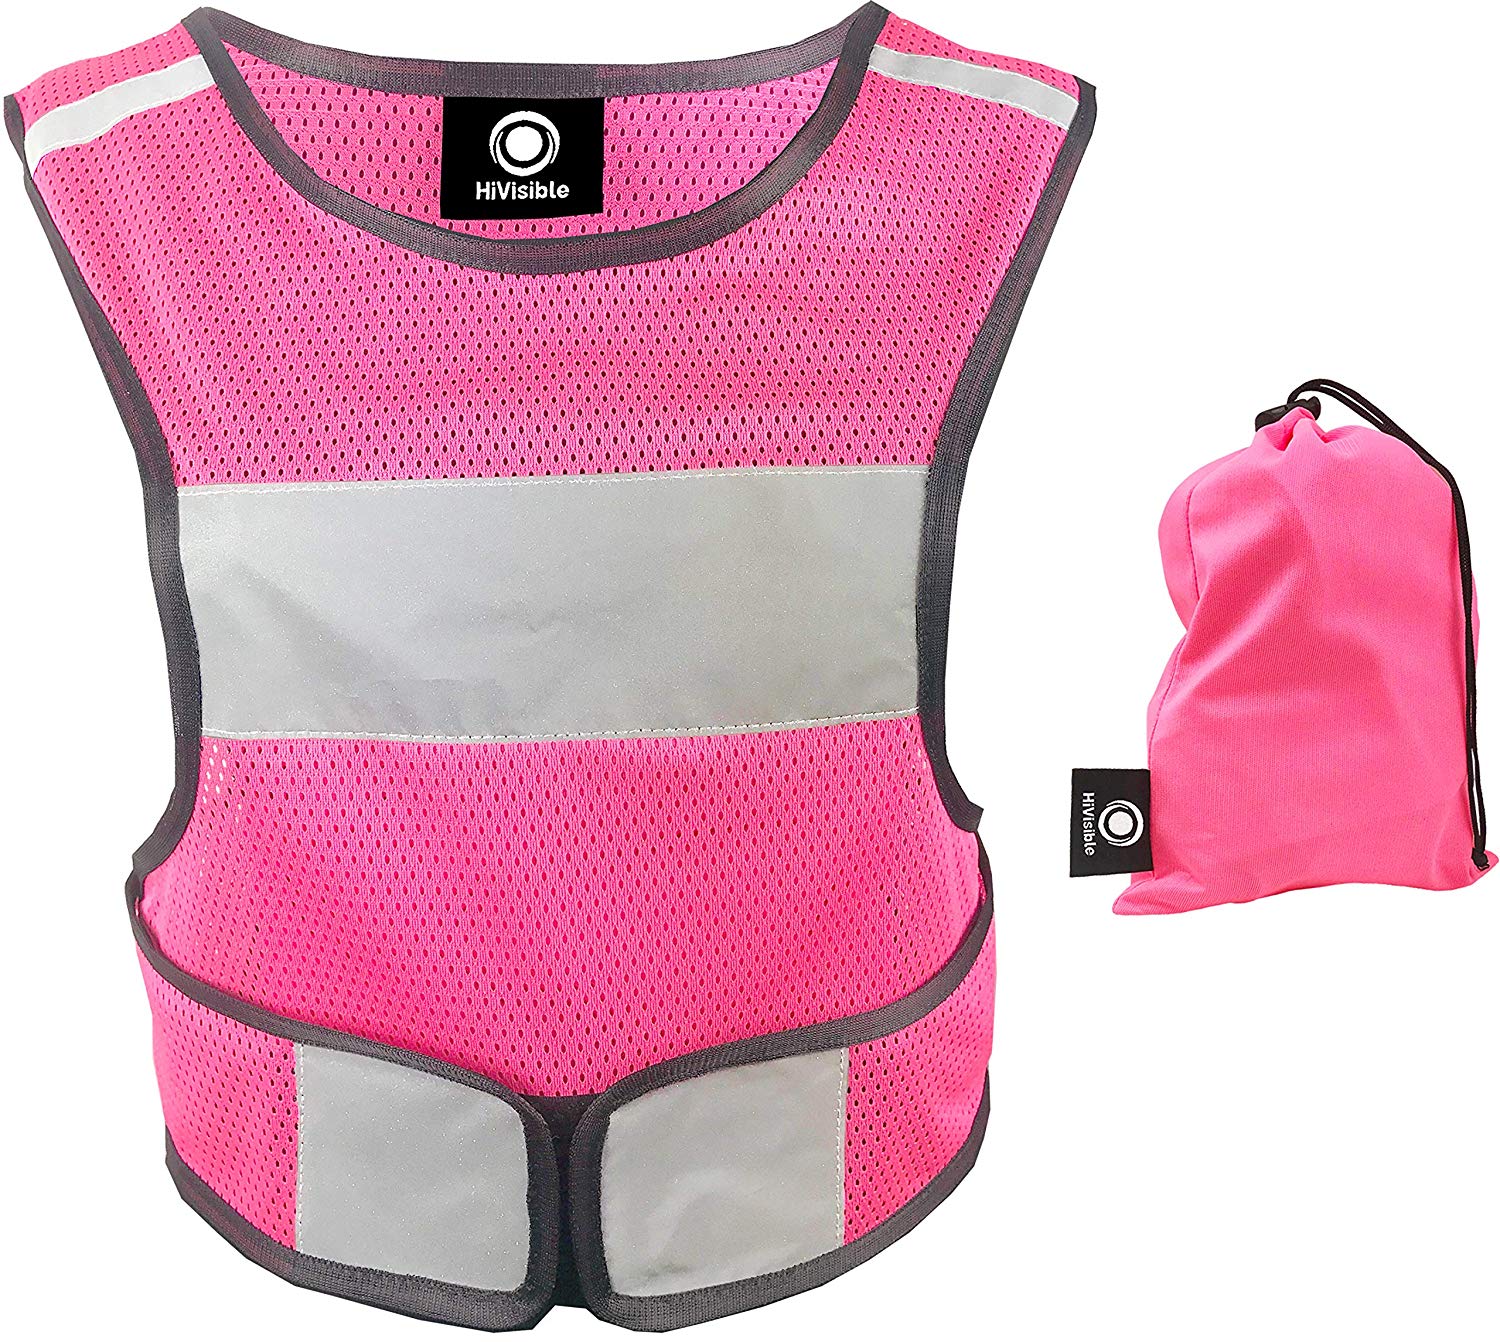 HiVisible Reflective Vest for Women 